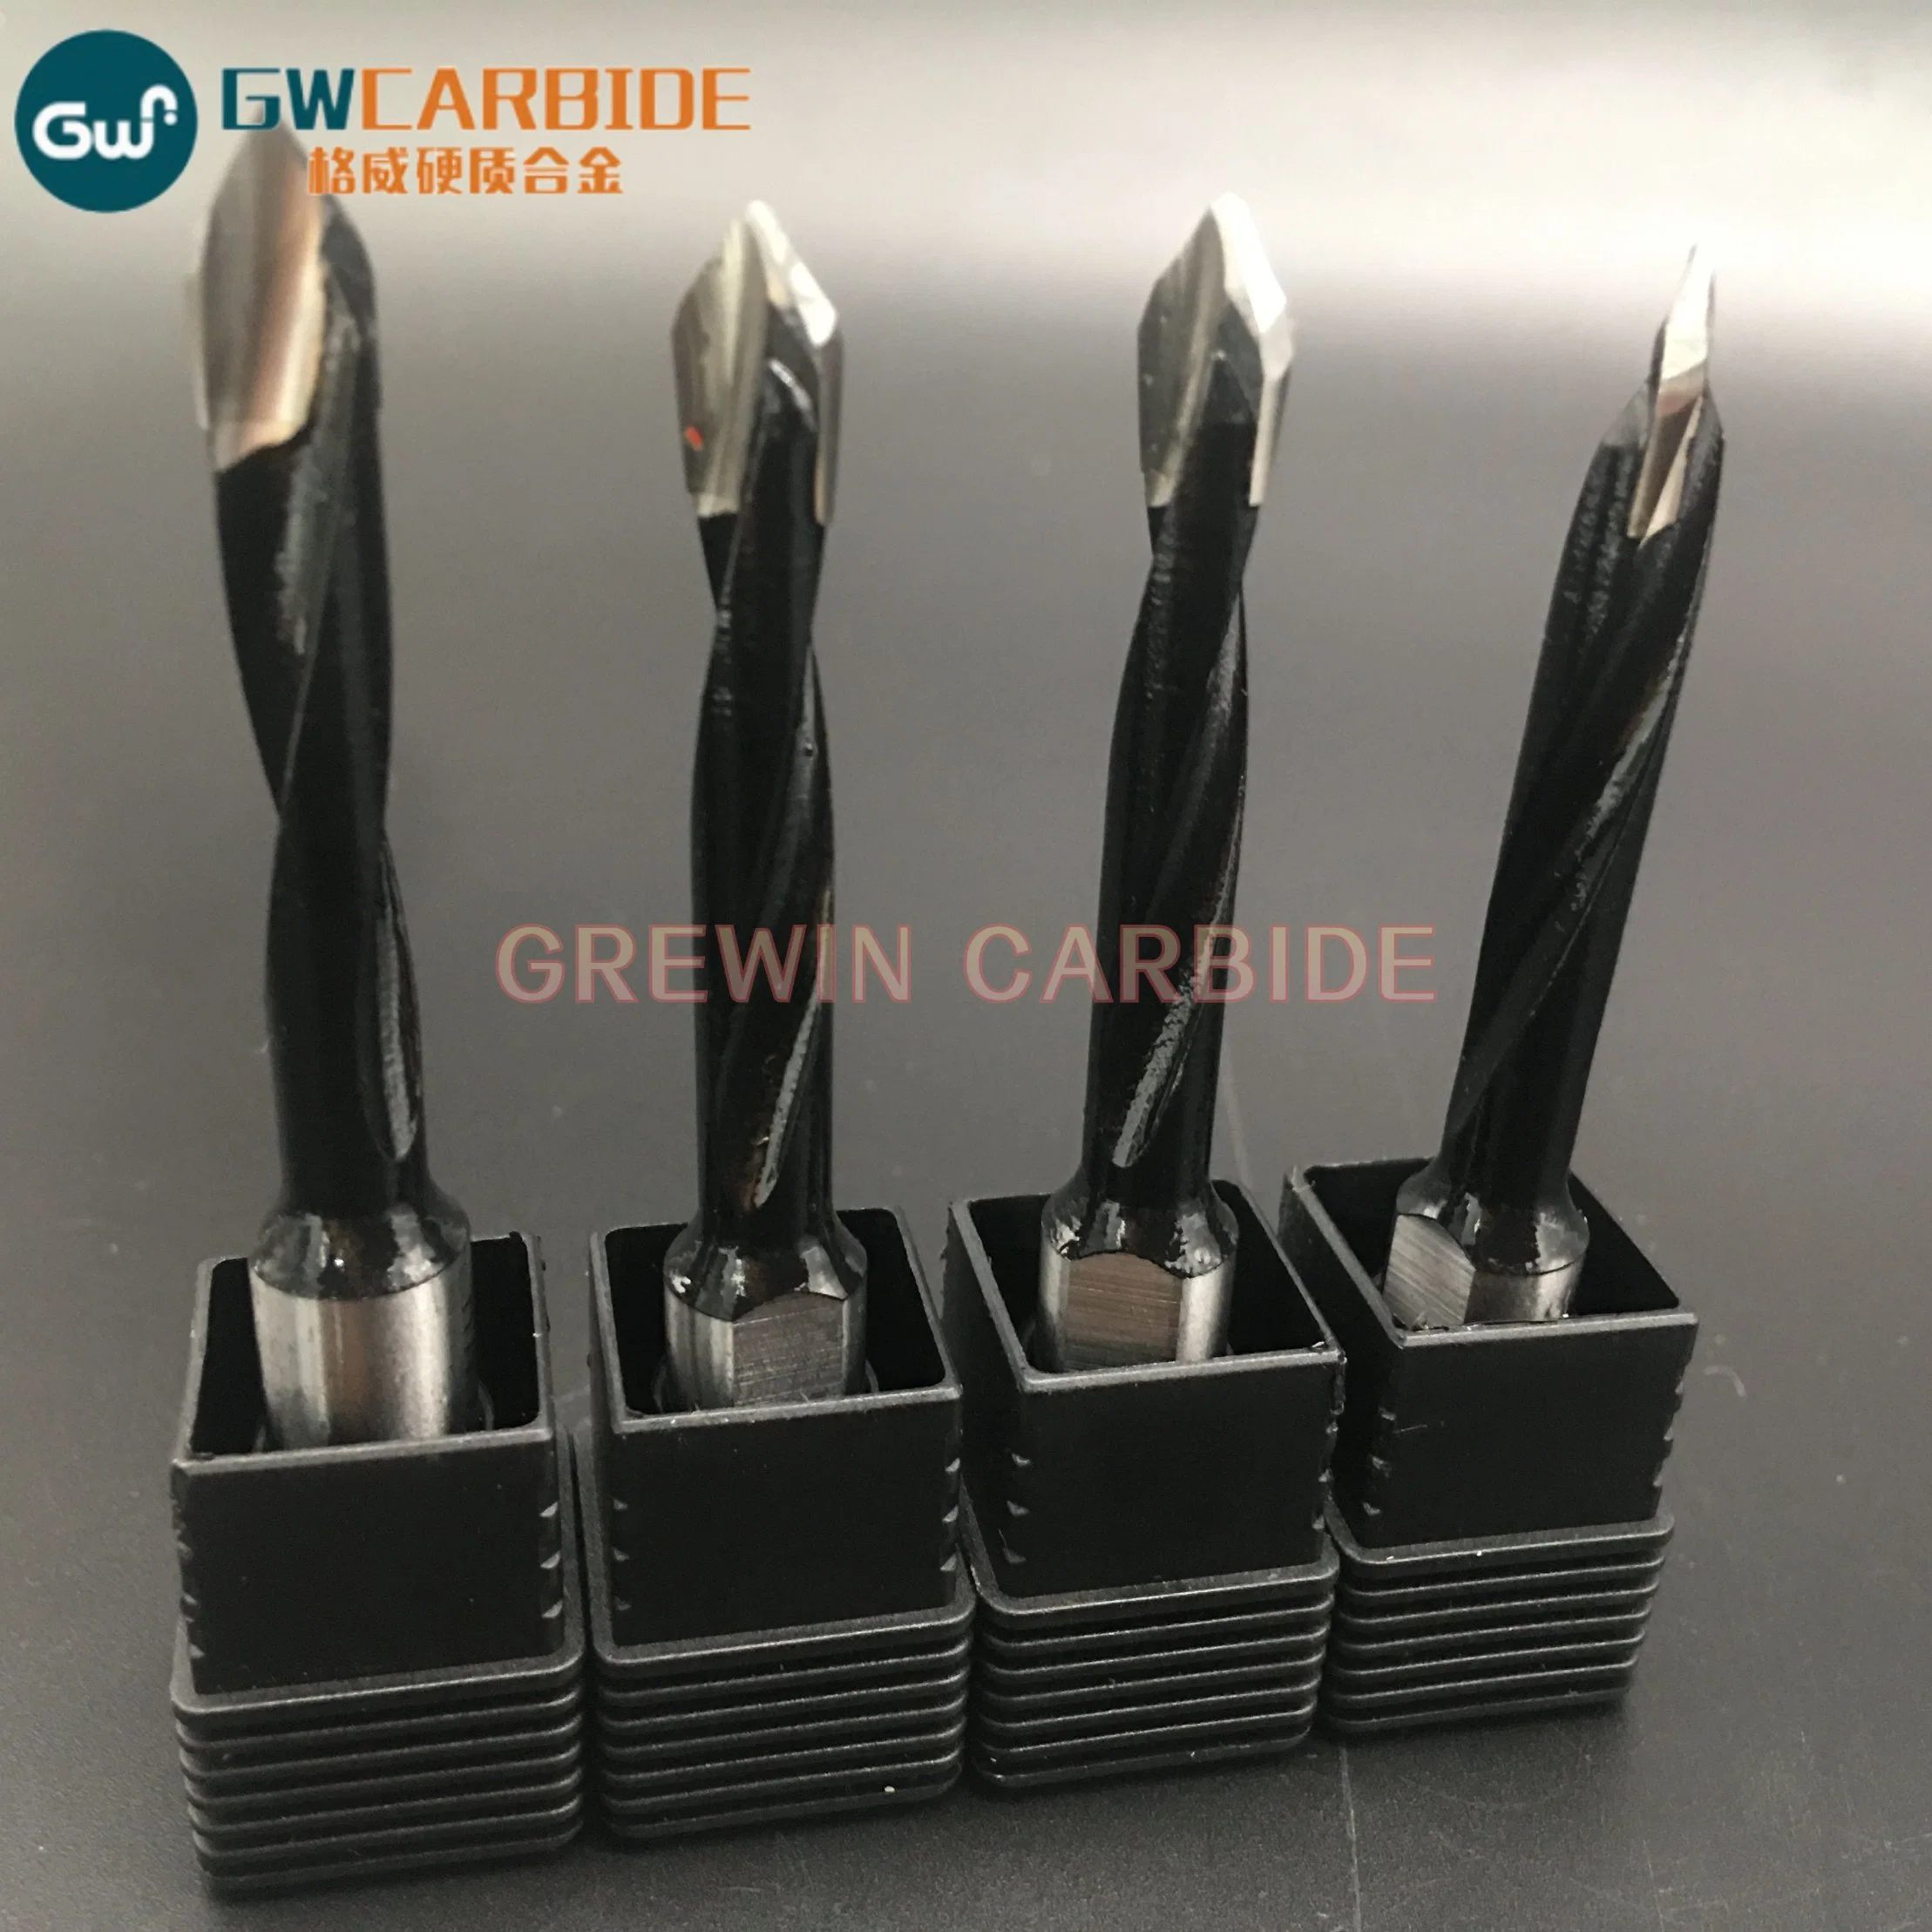 Gw-Carbide High Quality Solid Carbide Wood Hard Chamfer Cutter Mill Drill Bit for Woodworking Machine